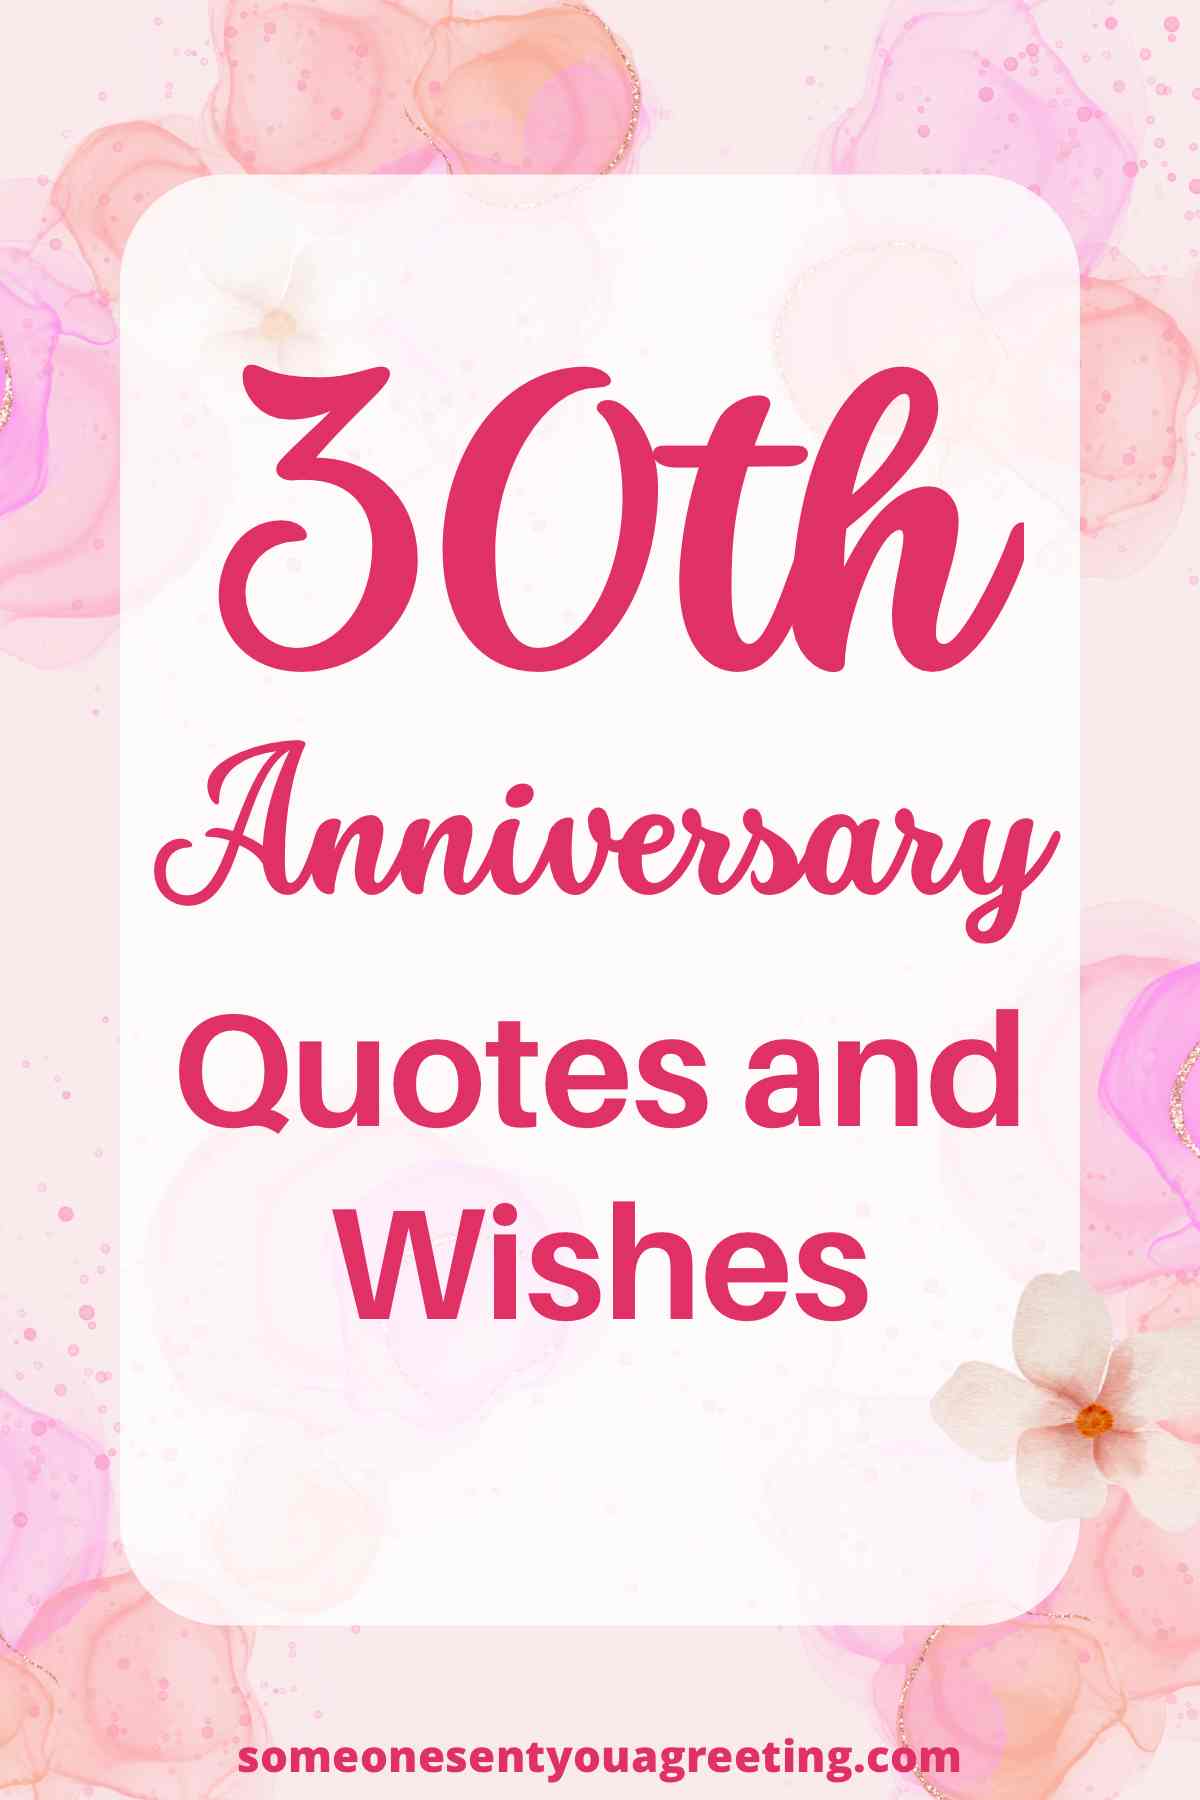 30th anniversary quotes